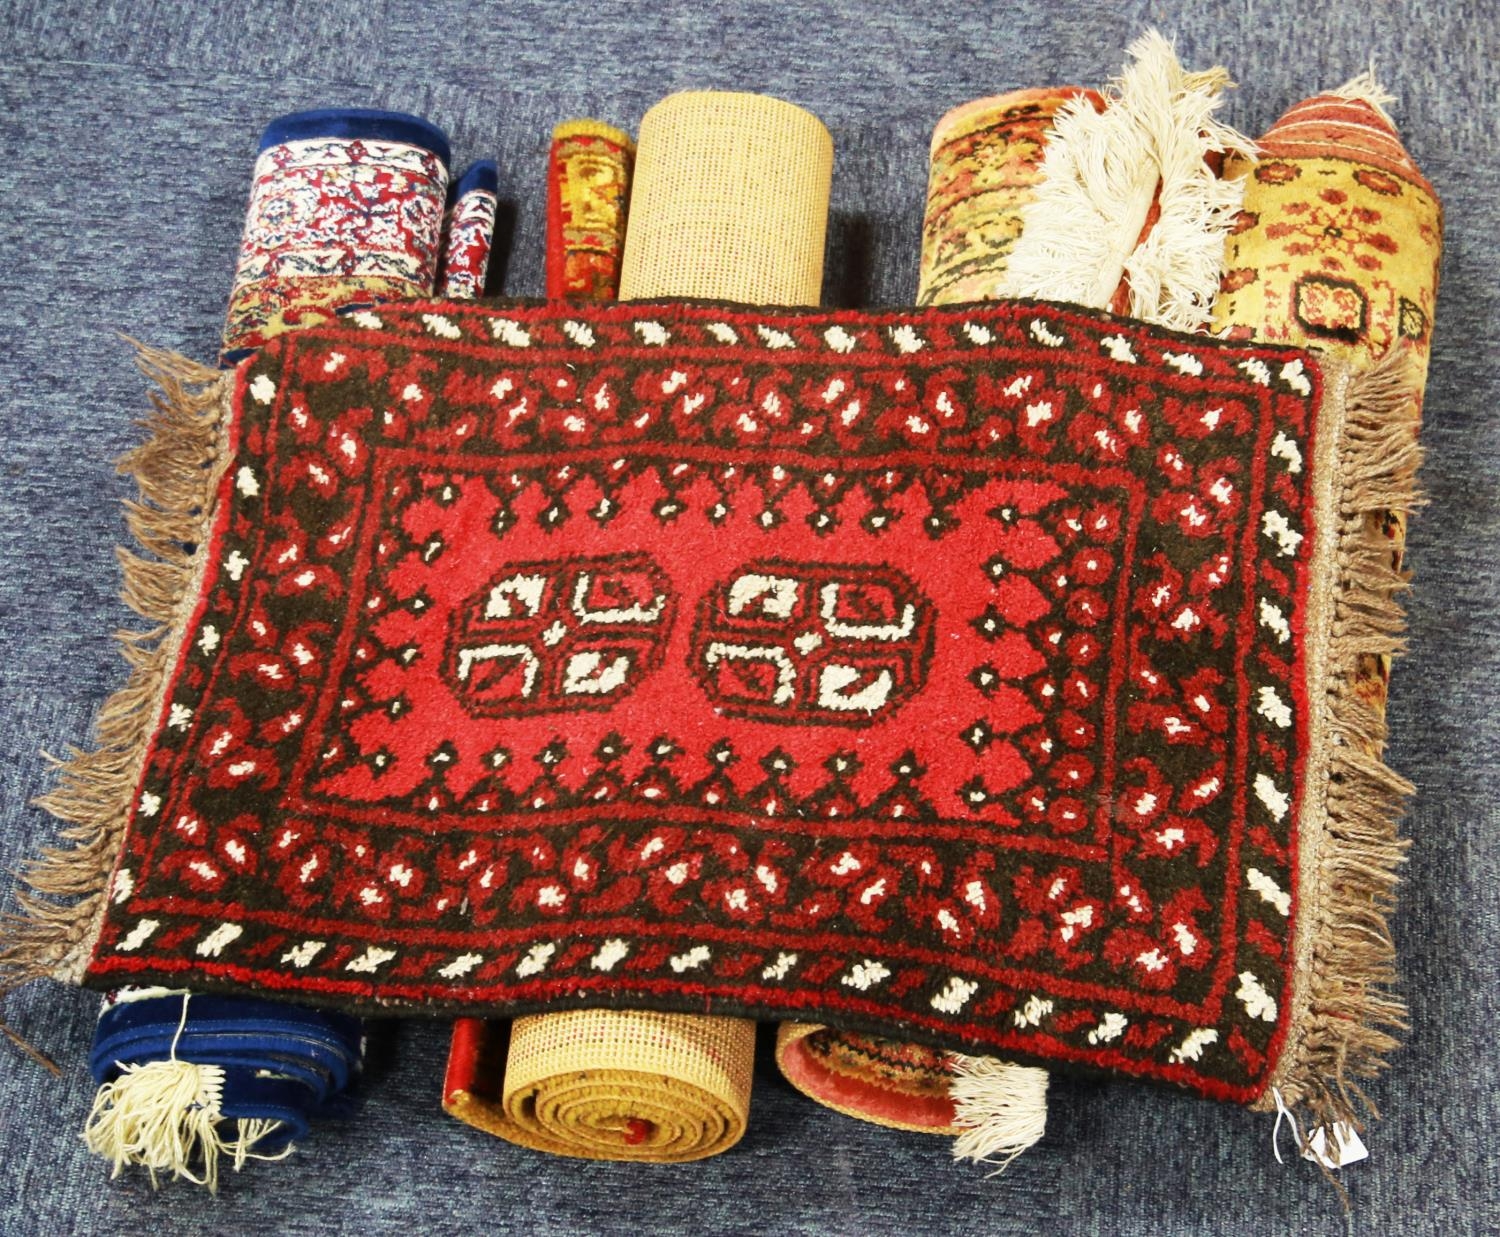 SMALL AFGHAN RUG, crimson with white detail, 1ft 10in x 1ft 3in ((60 x 40cm) and 4 OTHER SMALL RUGS, - Image 2 of 2